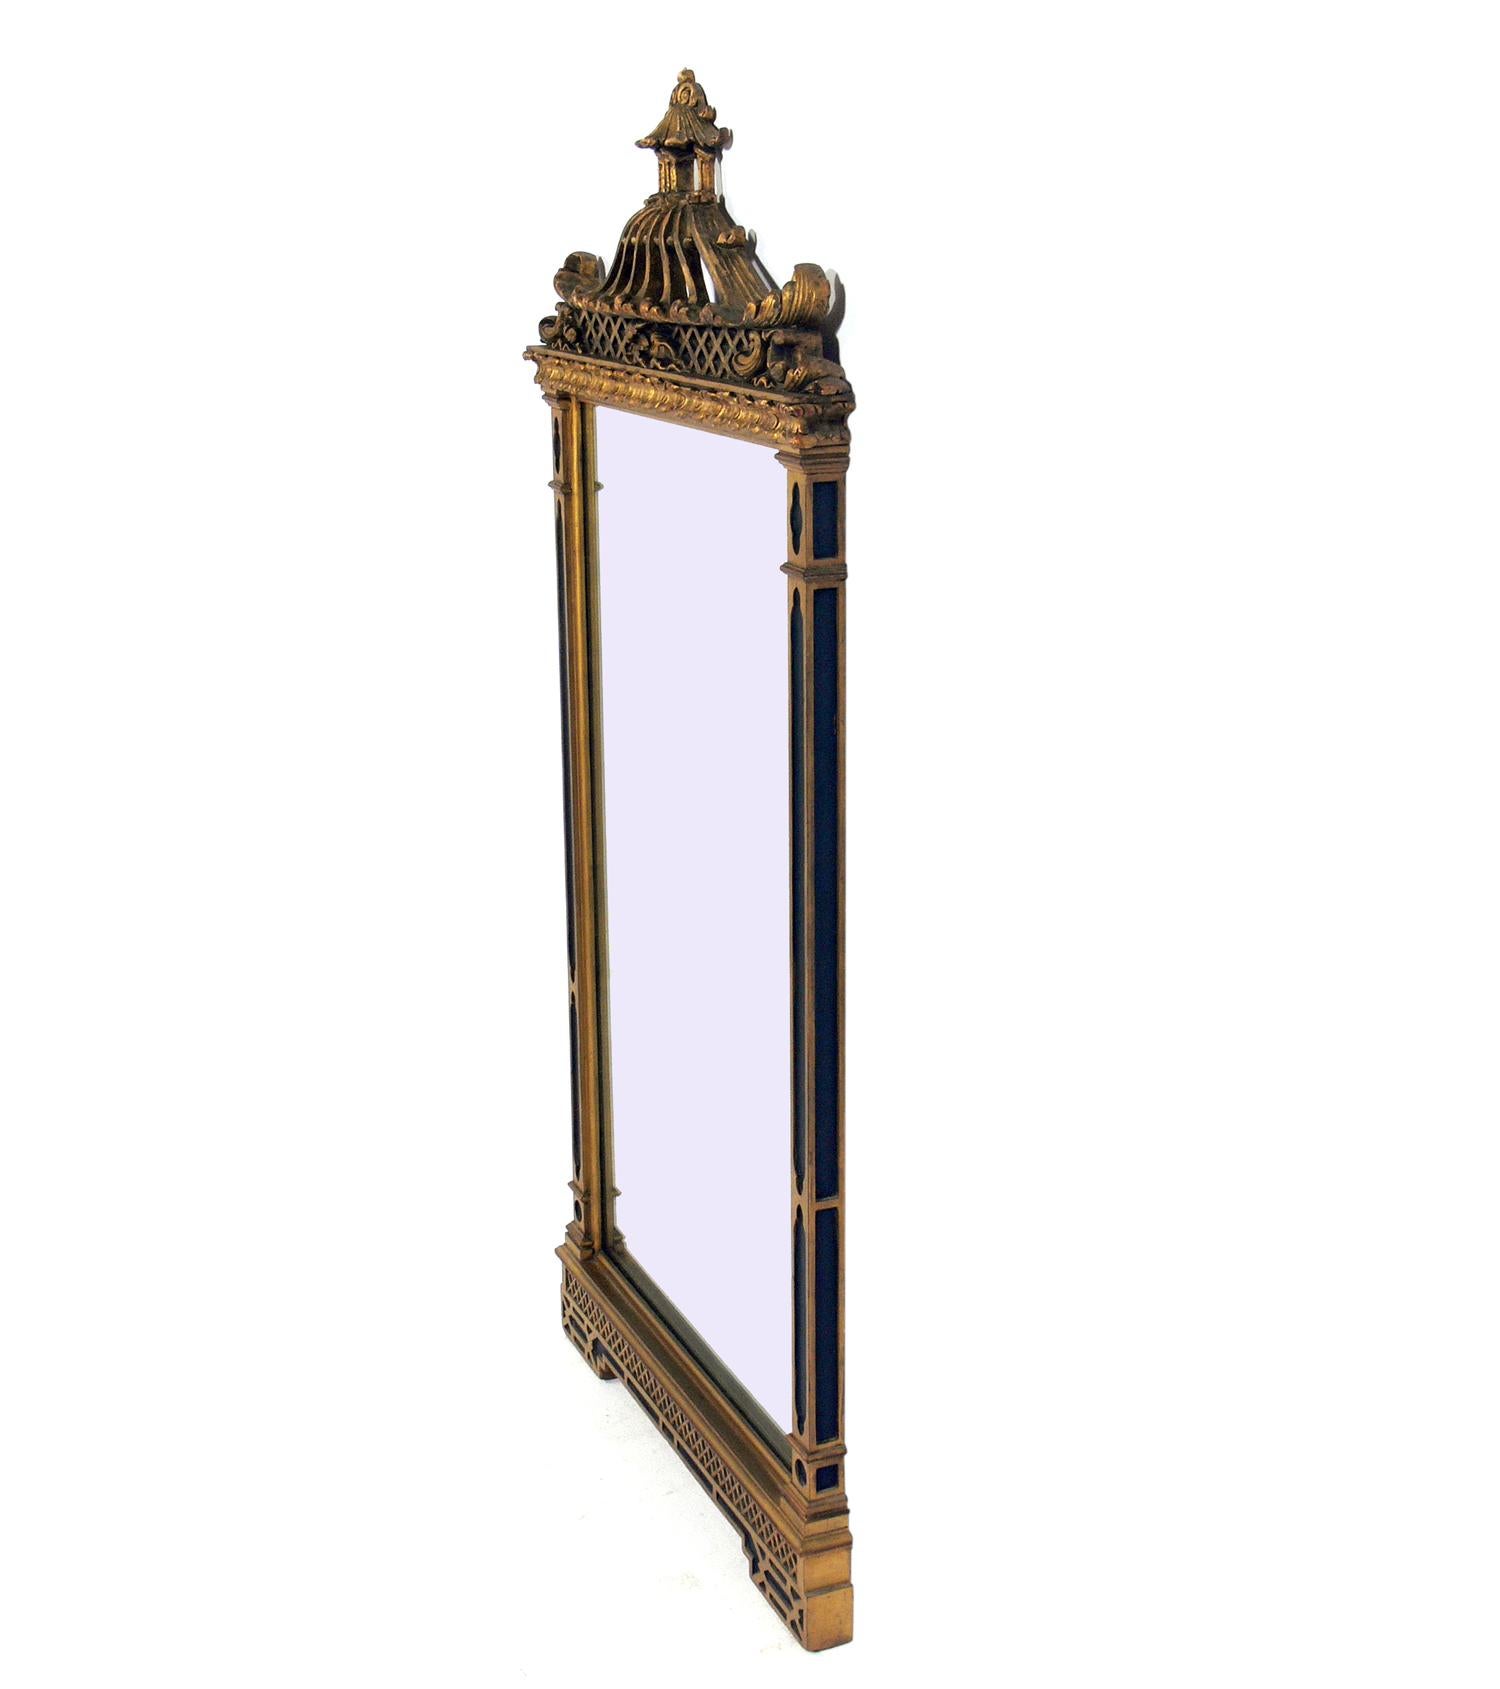 Black and gold gilt chinoiserie mirror, circa 1950s. Retains it's warm original patina to the giltwood frame and the original mirrored glass.